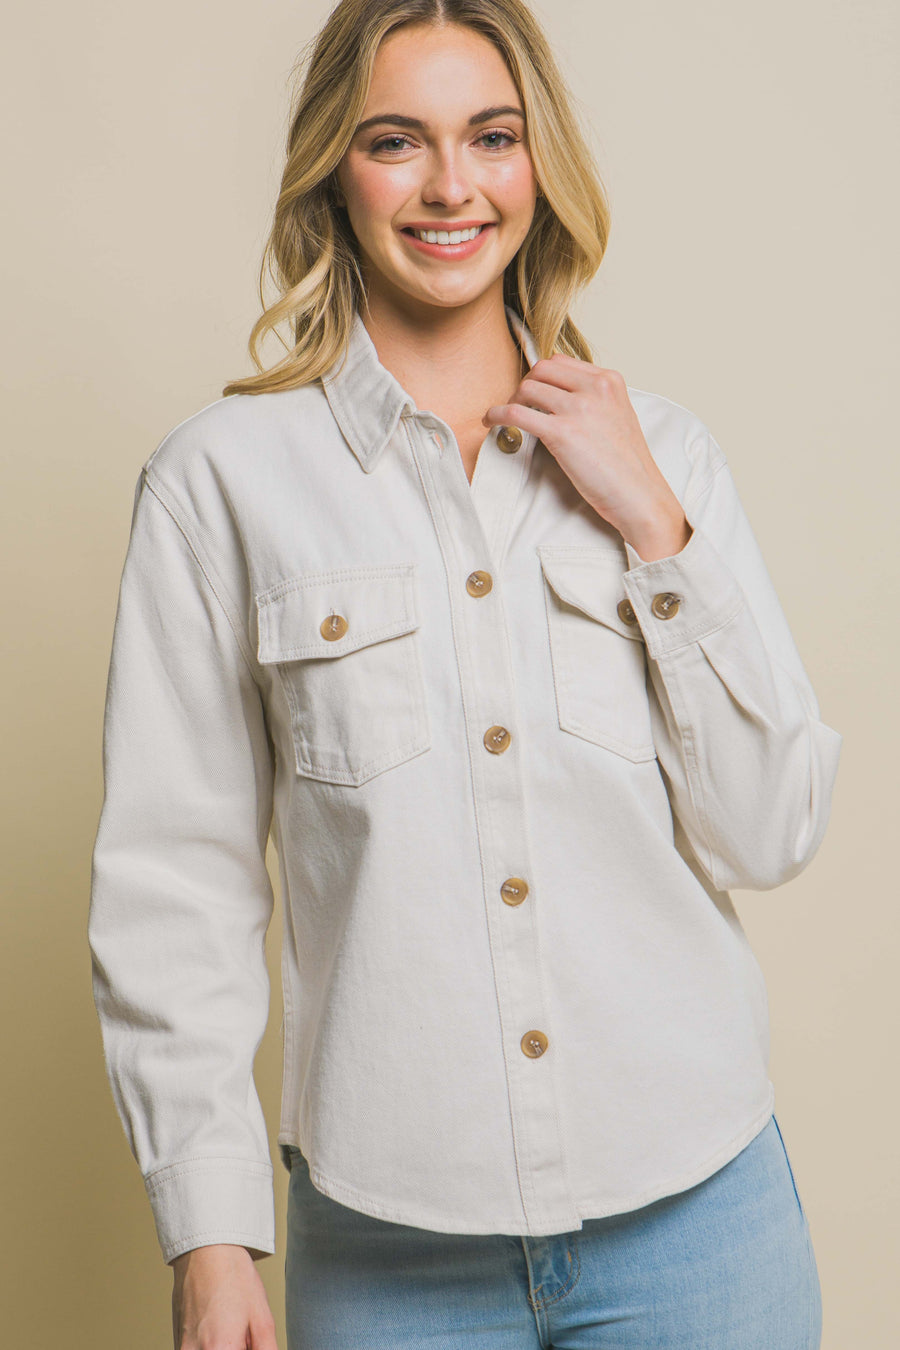 Featuring a longsleeve button up jacket with two front pockets in the color stone